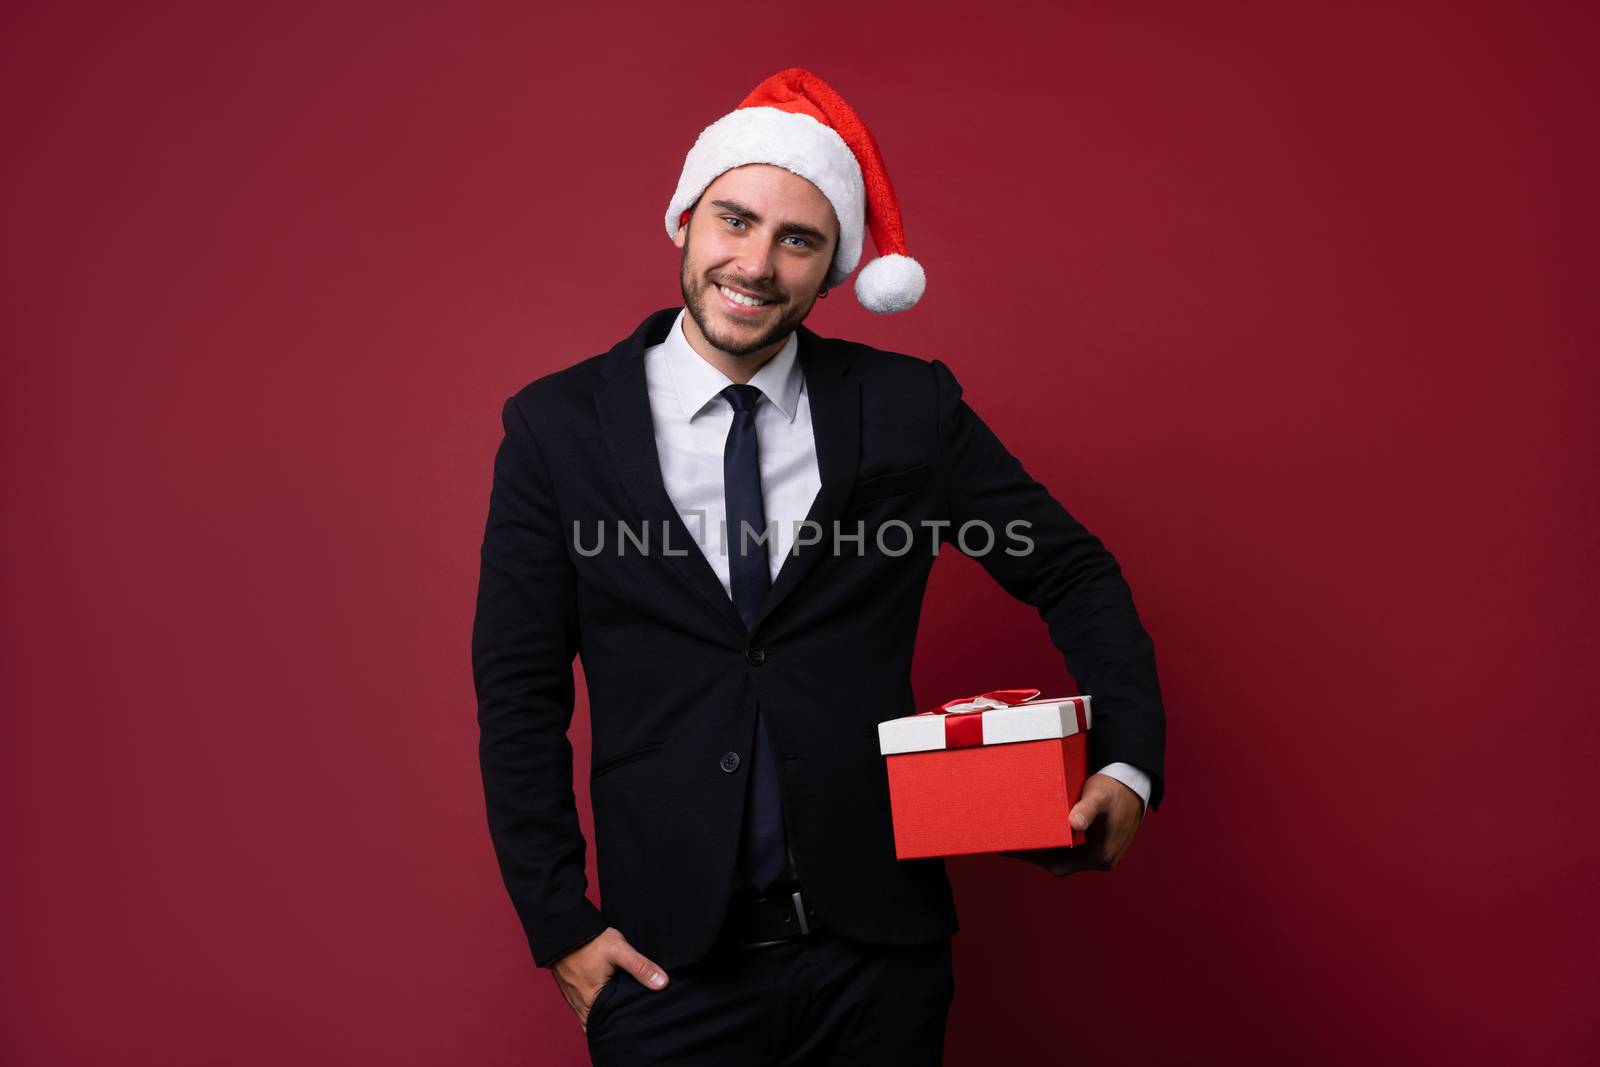 Young handsome caucasian guy in business suit and Santa hats stands on white background in studio and smilie Holding red gift box in hand. Portrait business person with Christmas mood Holiday banner